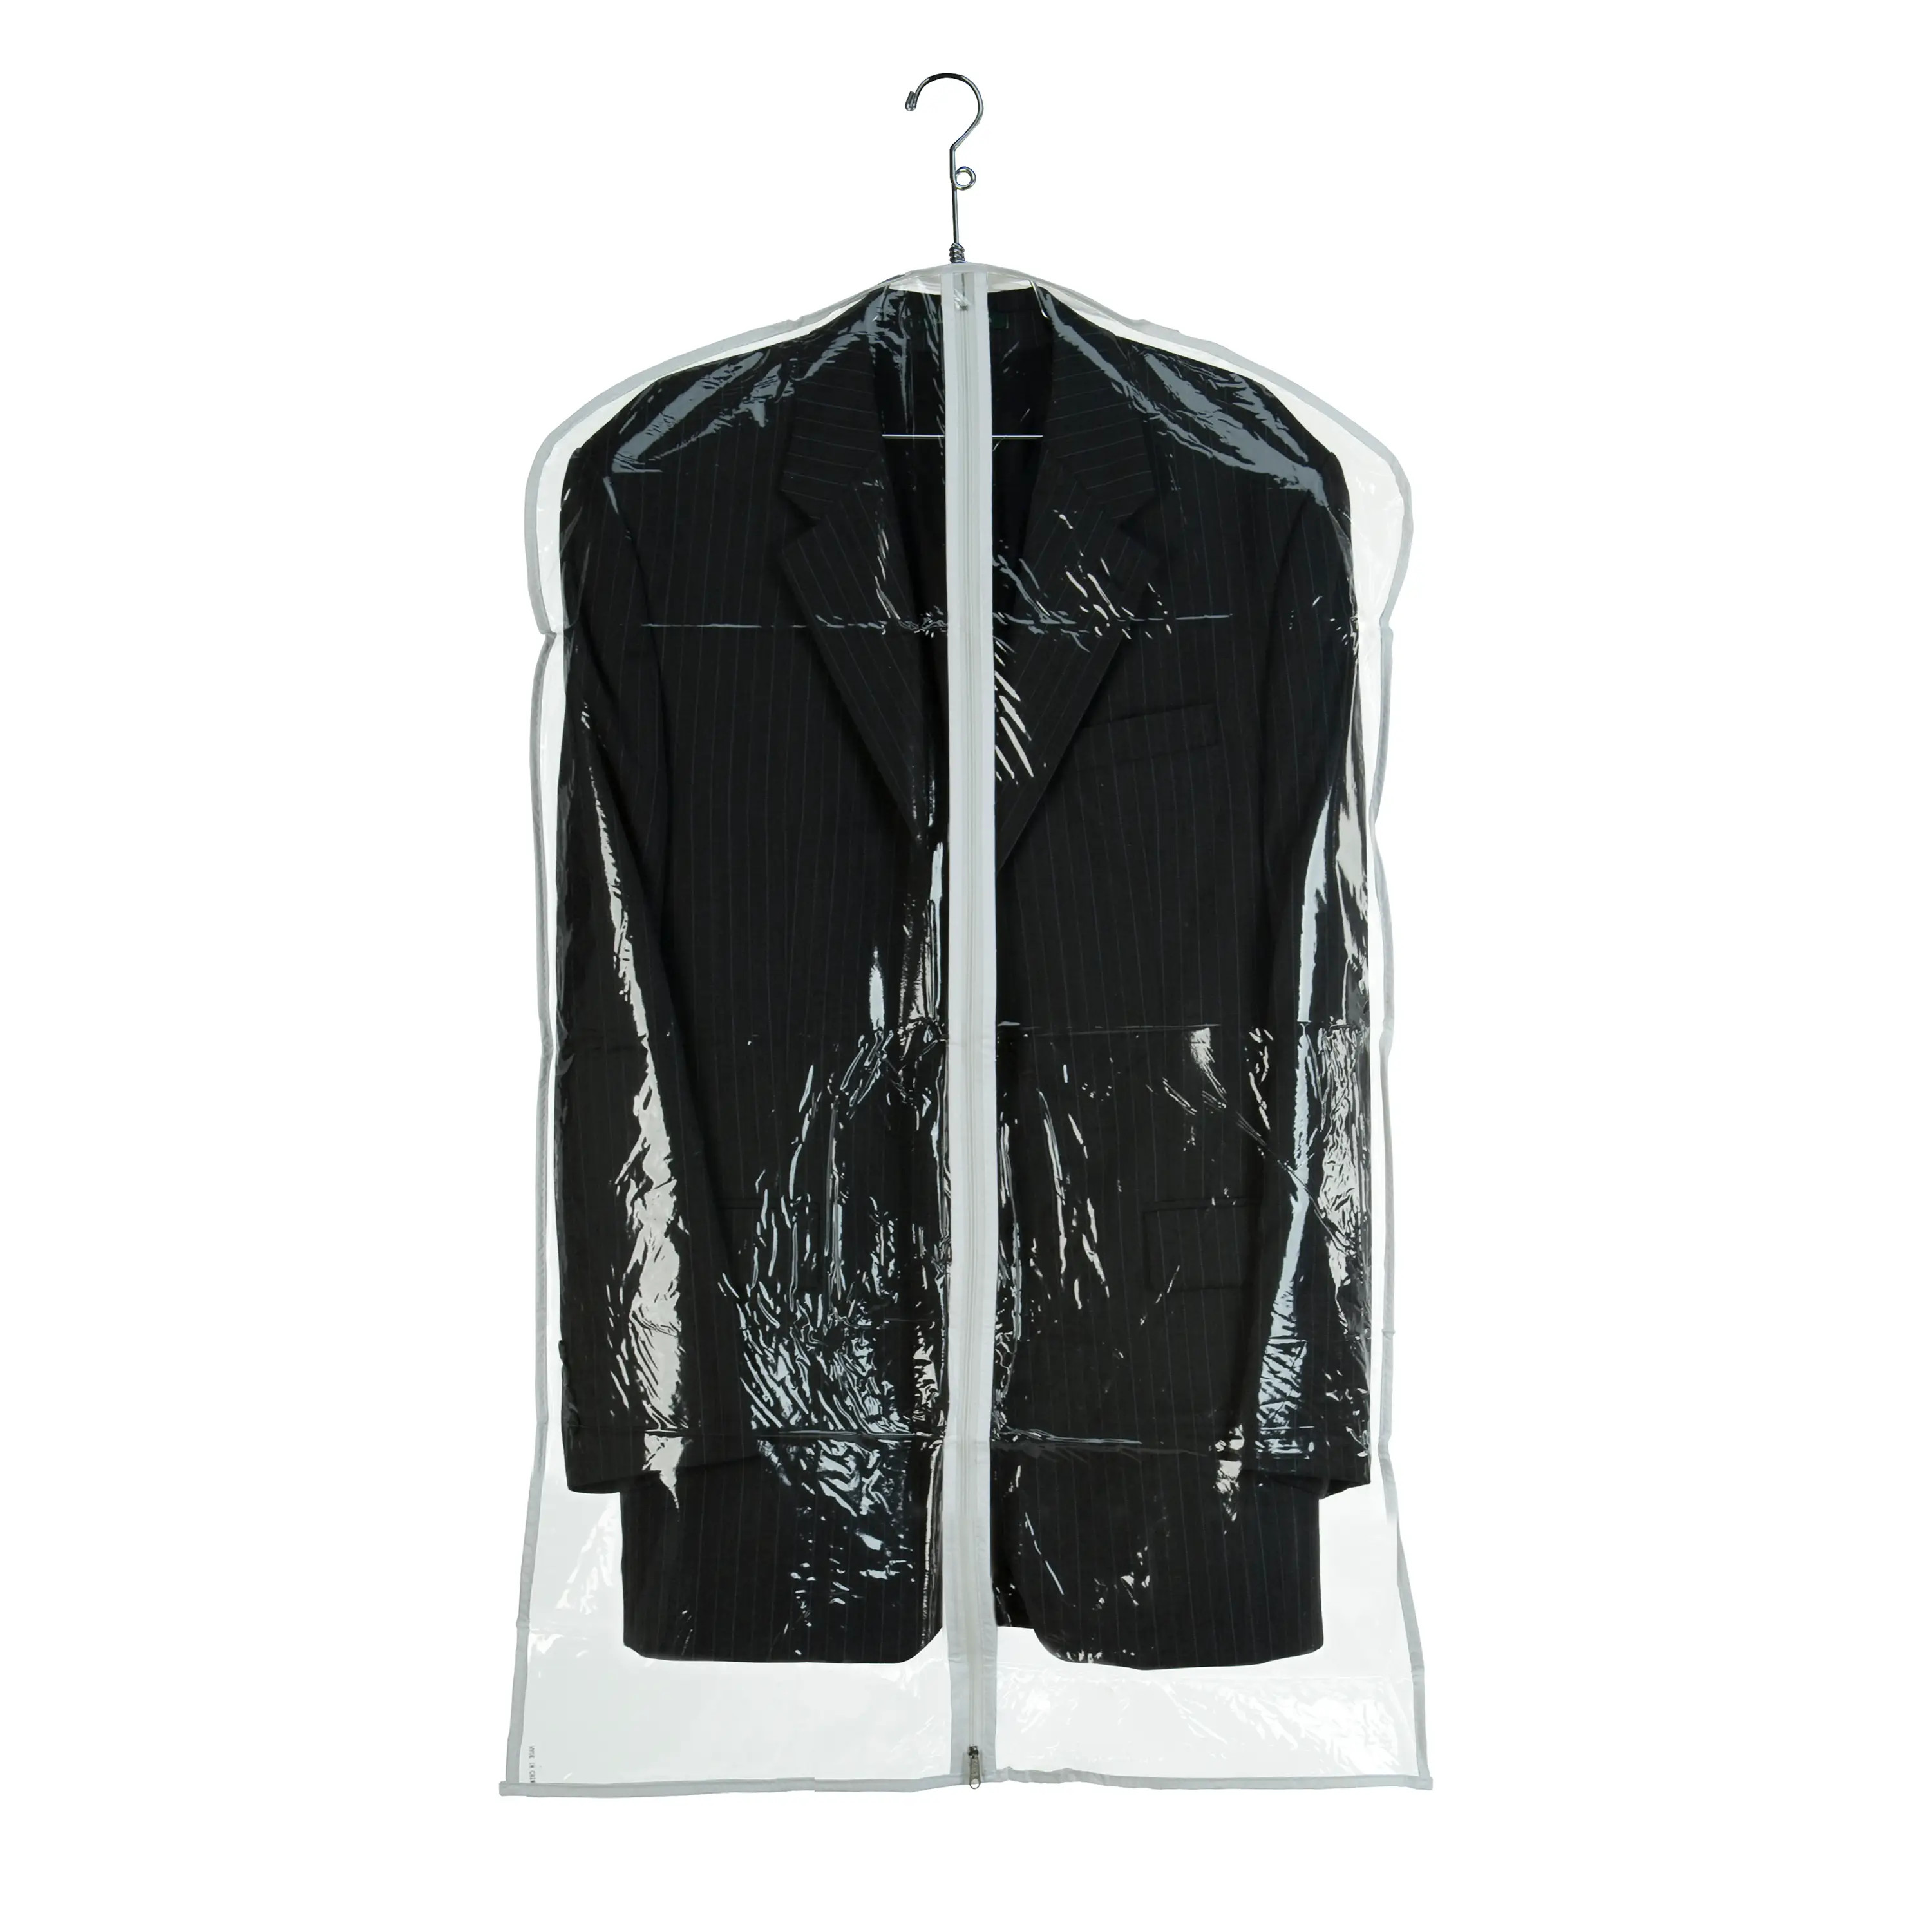 Garment bag 51 inch for apparel collection - clothes covers